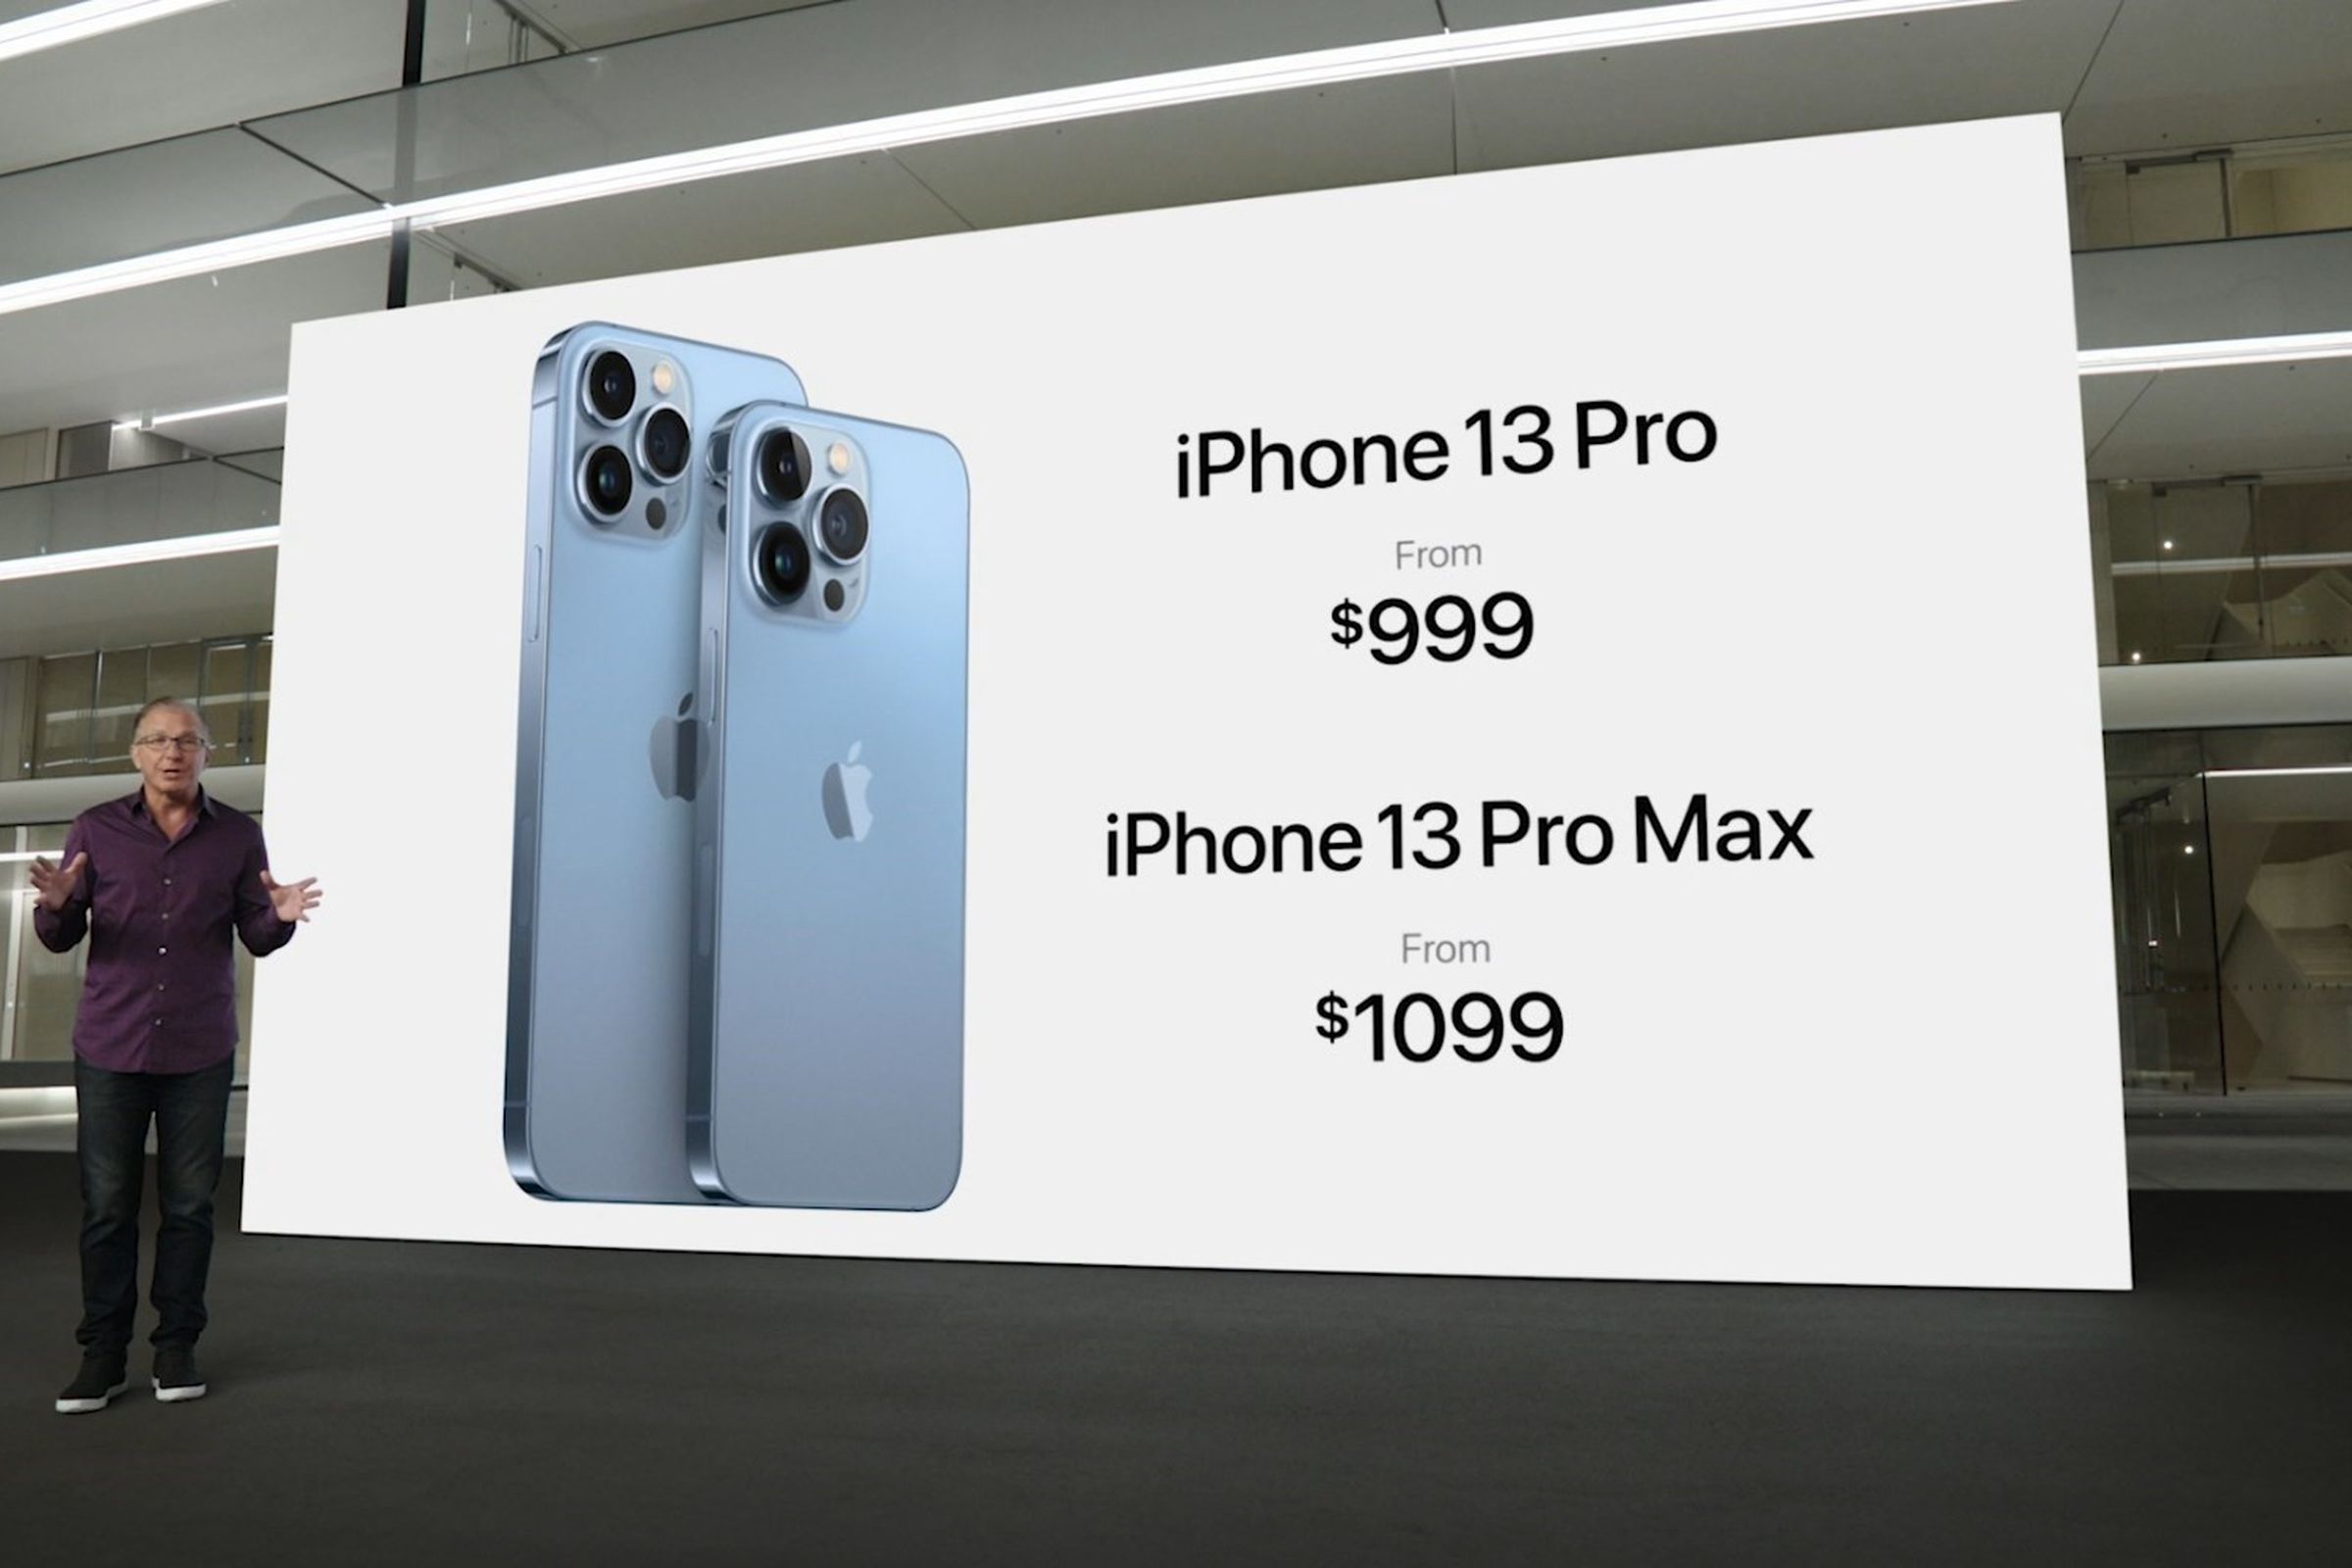 Prices for iPhone 13 Pro and iPhone Pro Max, as announced at the 2021 Apple Event.